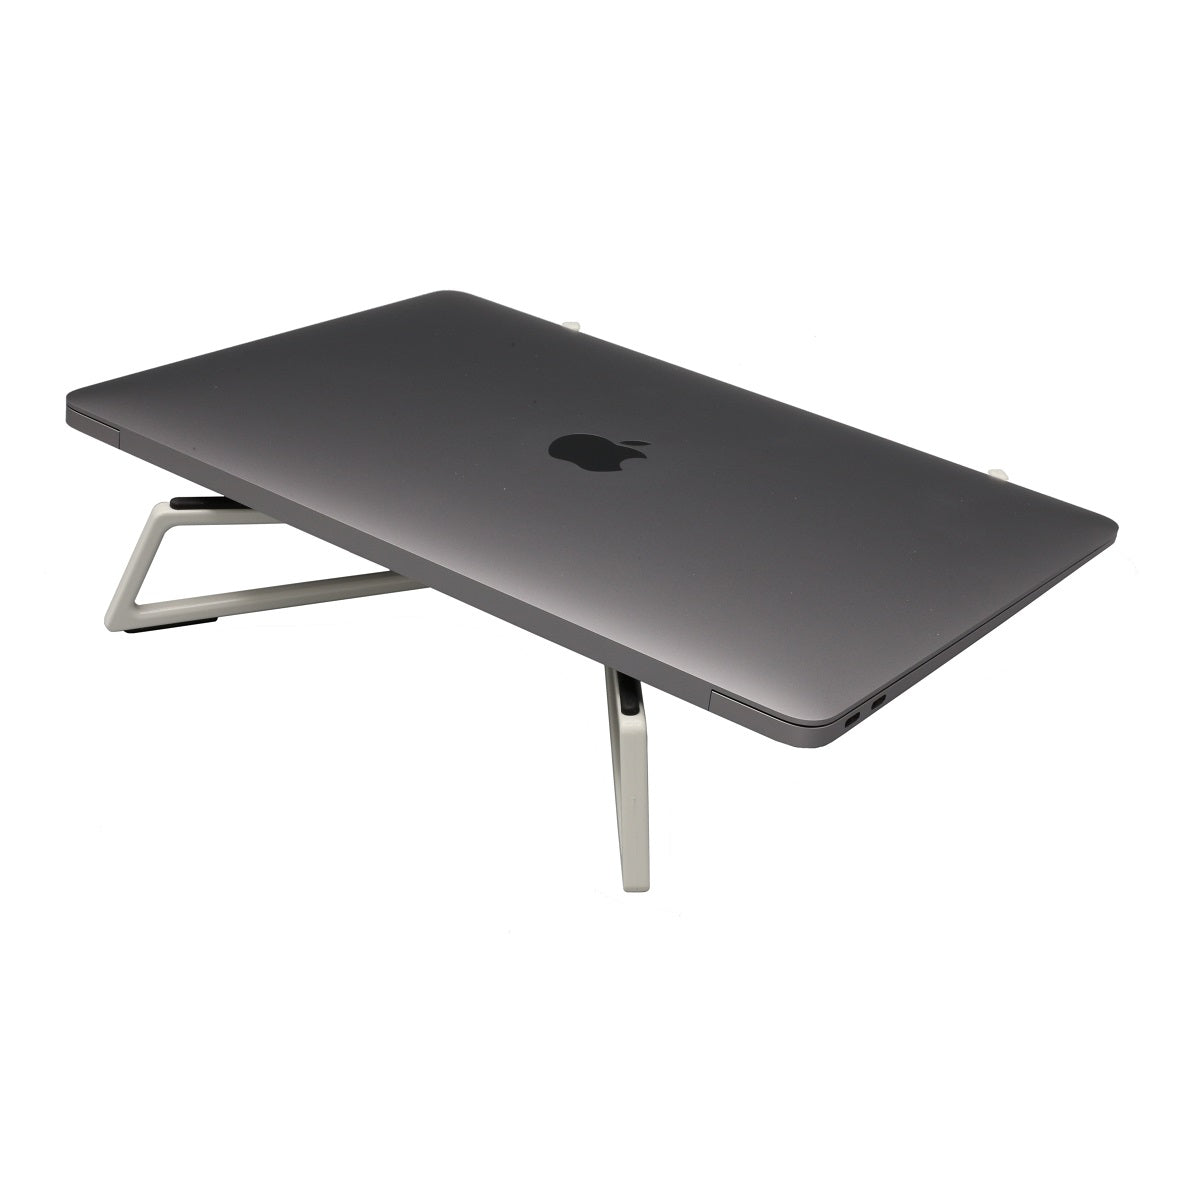 The Flexverk Laptop Stand is shown in Peral White expanded and supporting a closed Macbook Air on a white background.